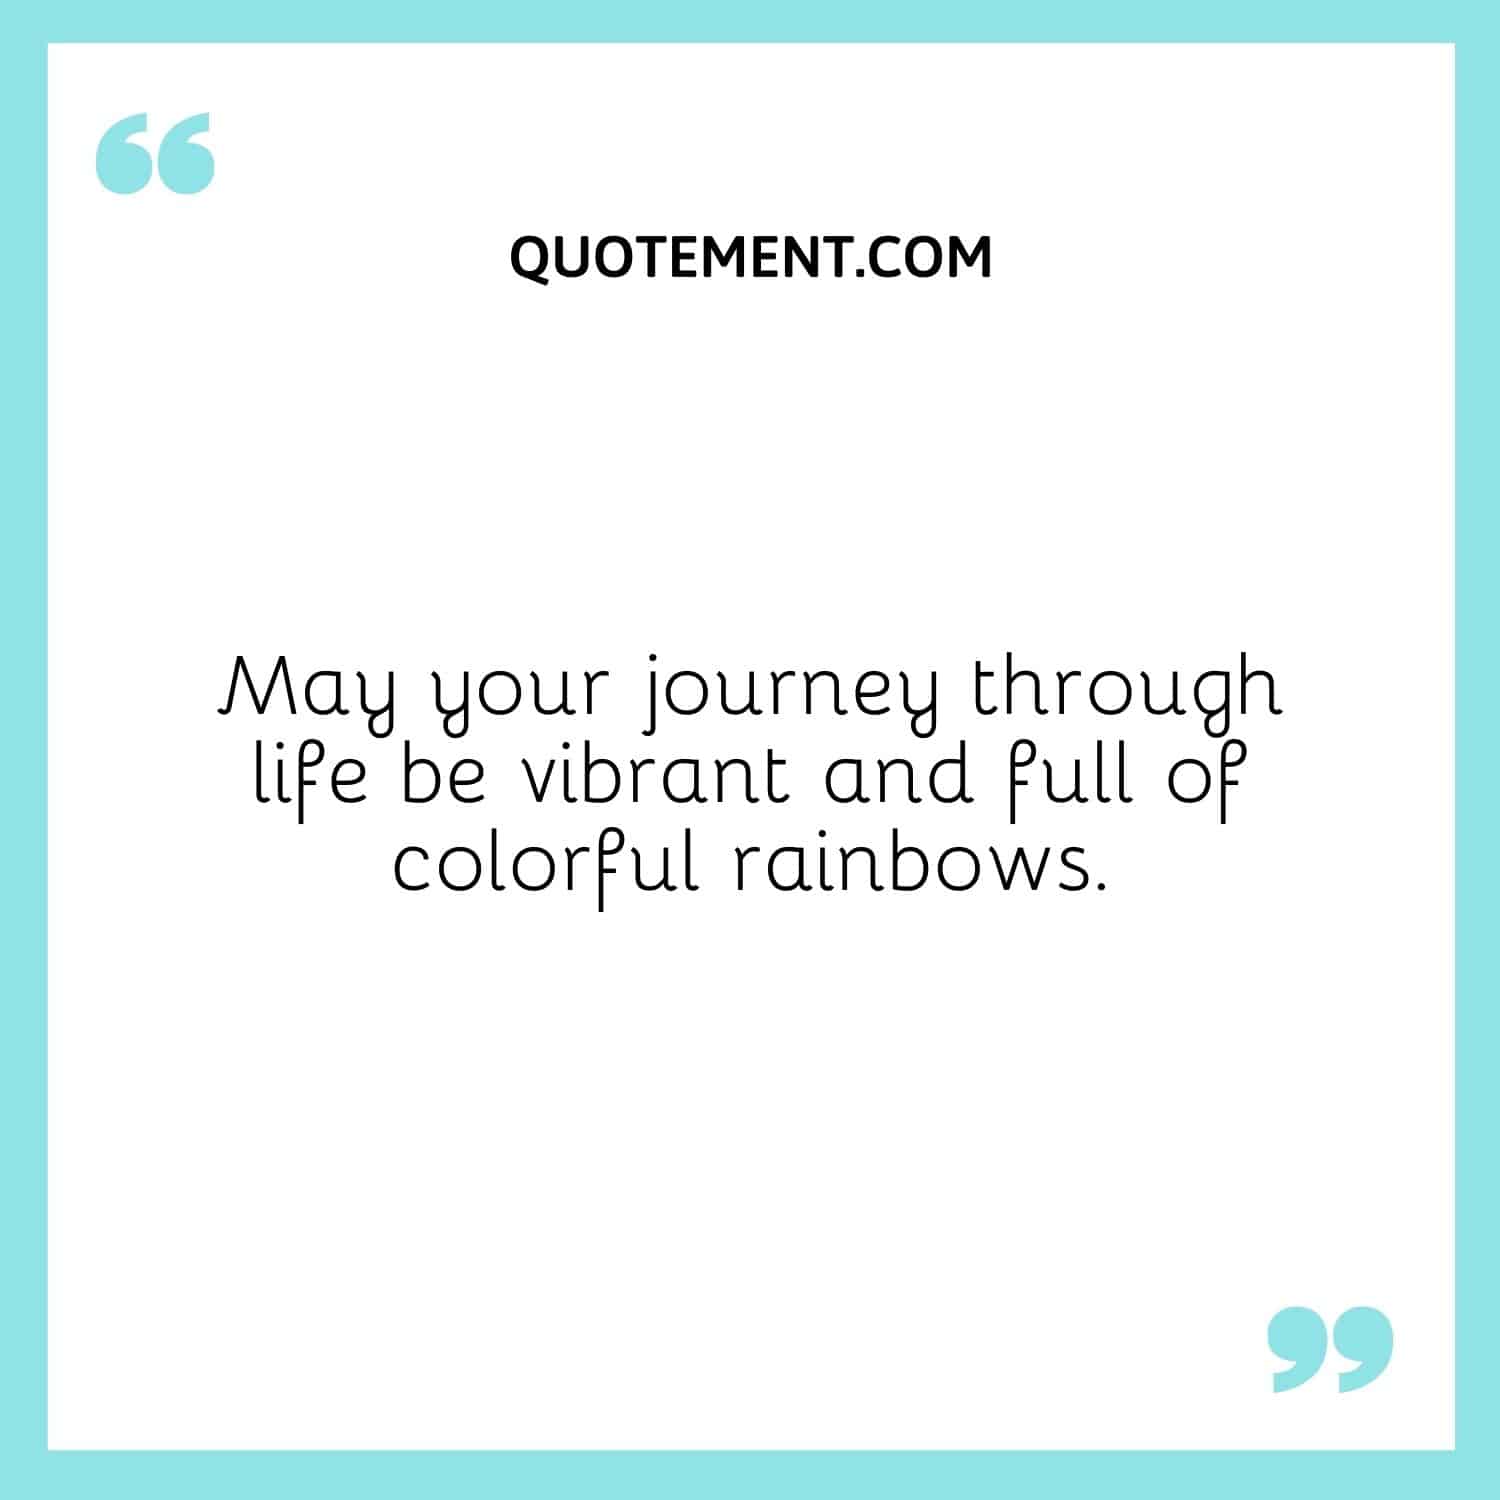 May your journey through life be vibrant and full of colorful rainbows.